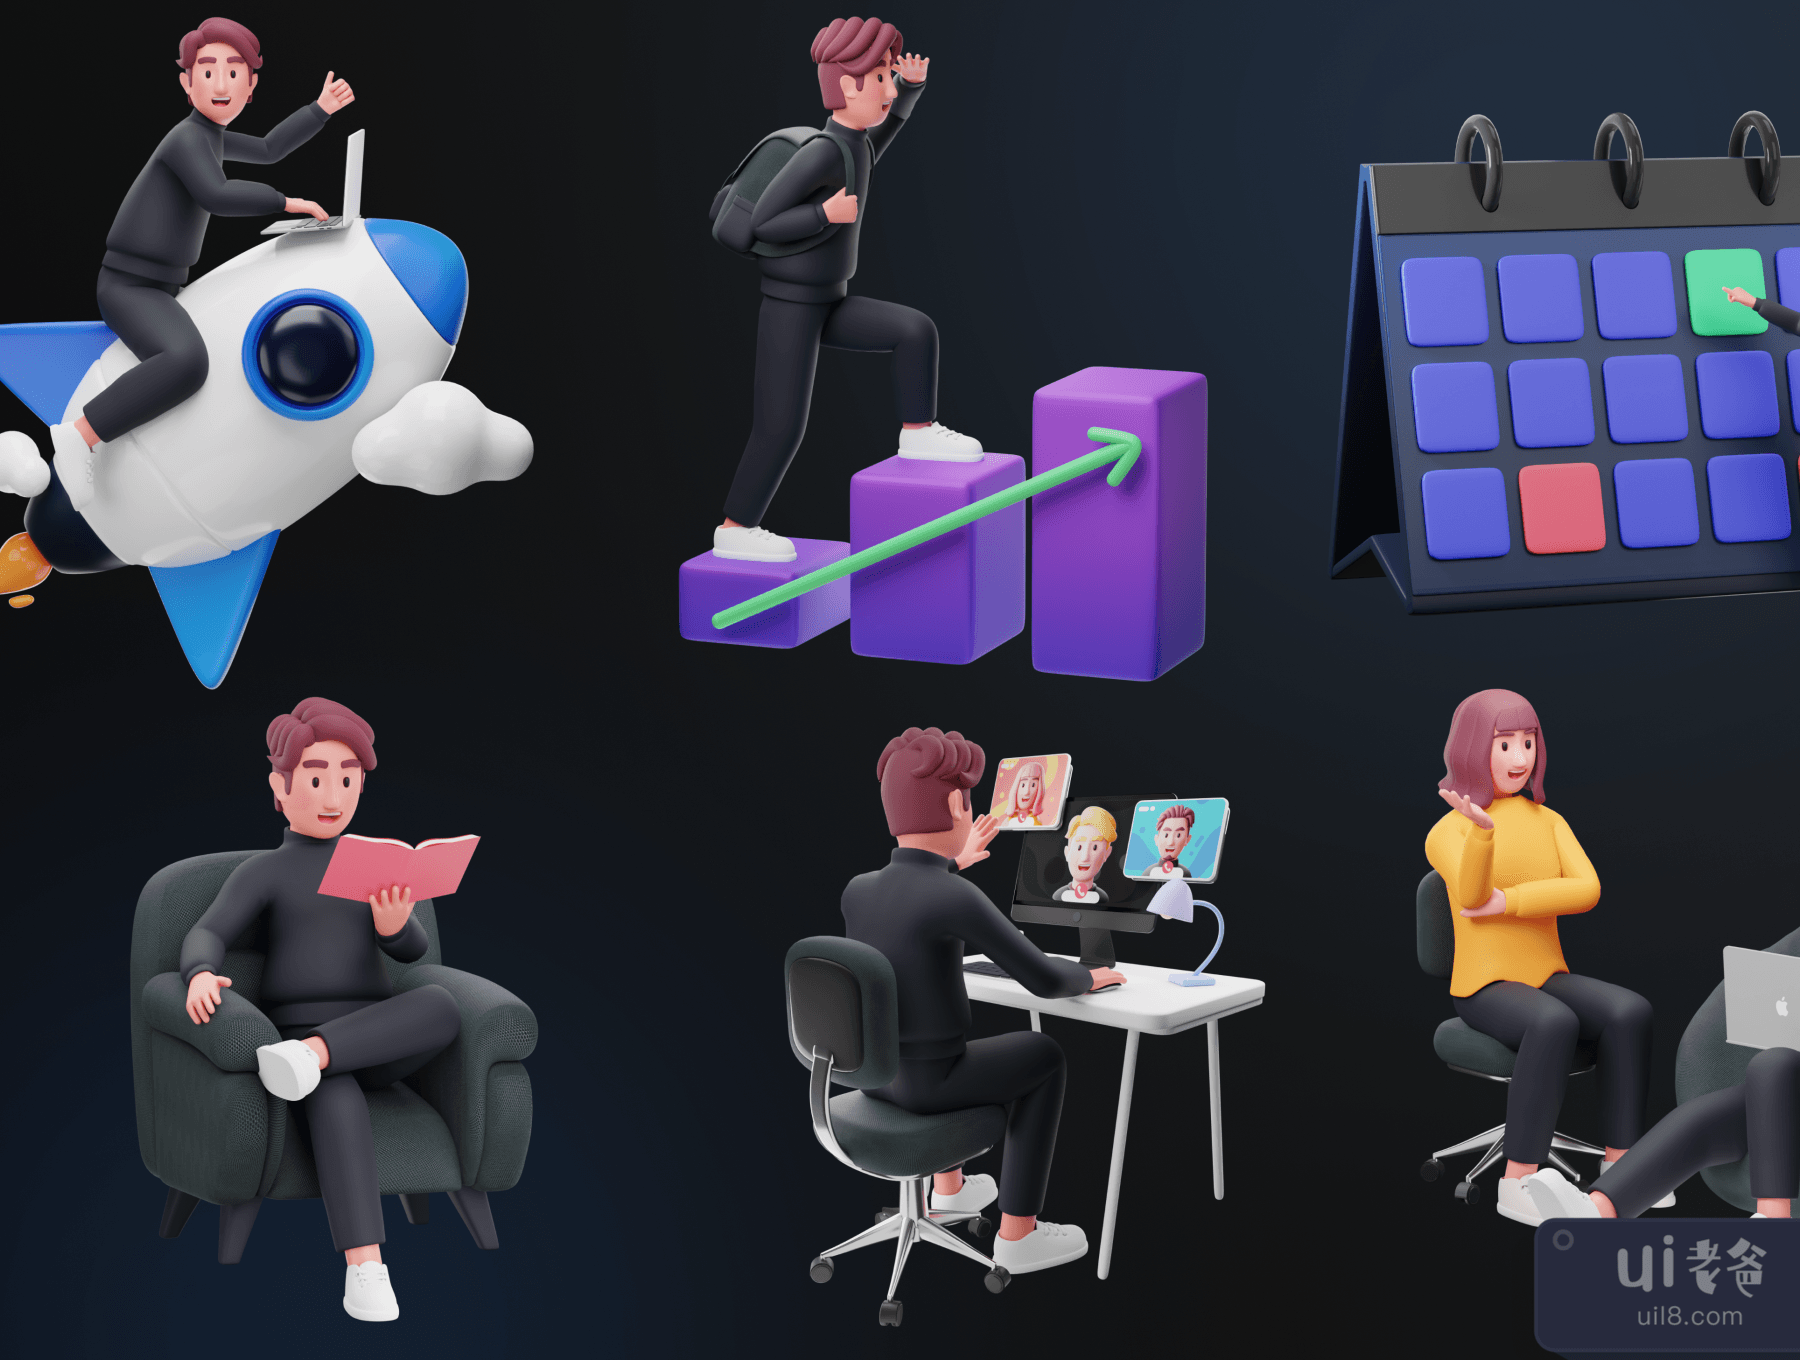 Workly - 创业和工作环境3D人物 (Workly - Startup & Work Environment 3D Character)插图1